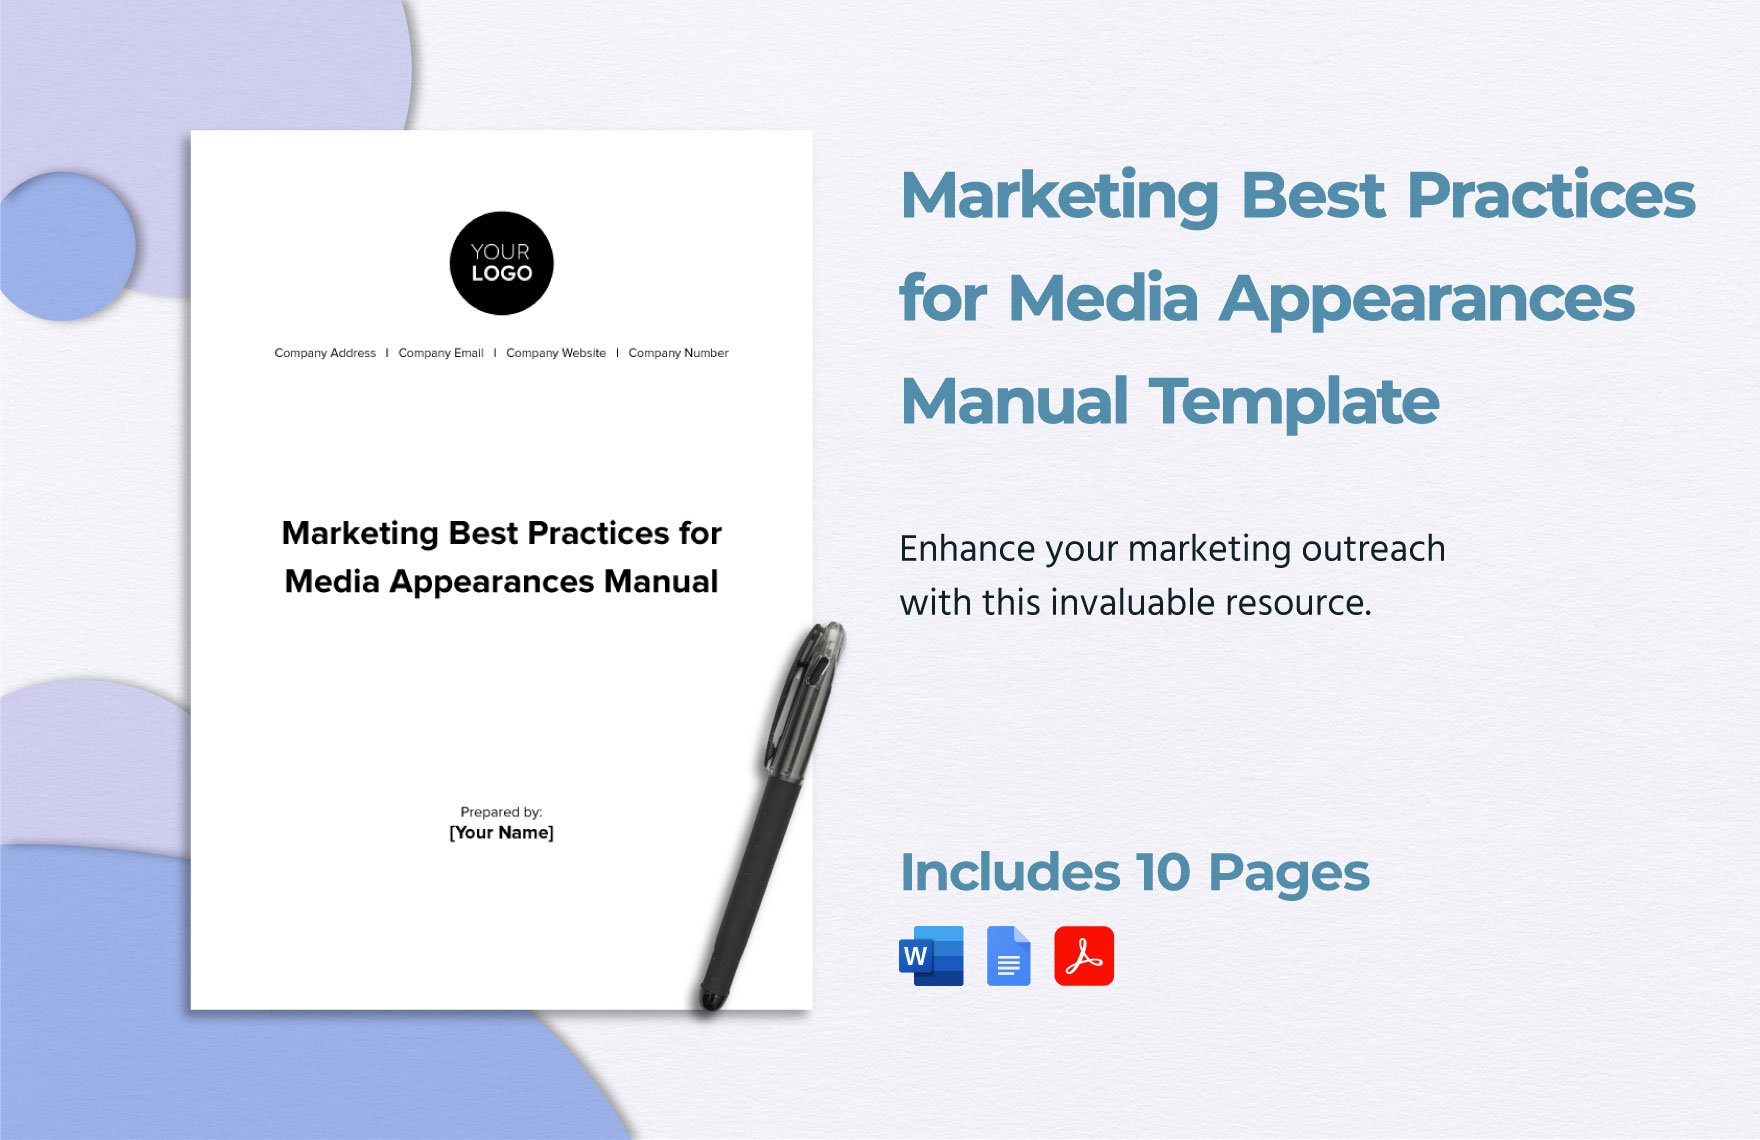 Marketing Best Practices for Media Appearances Manual Template